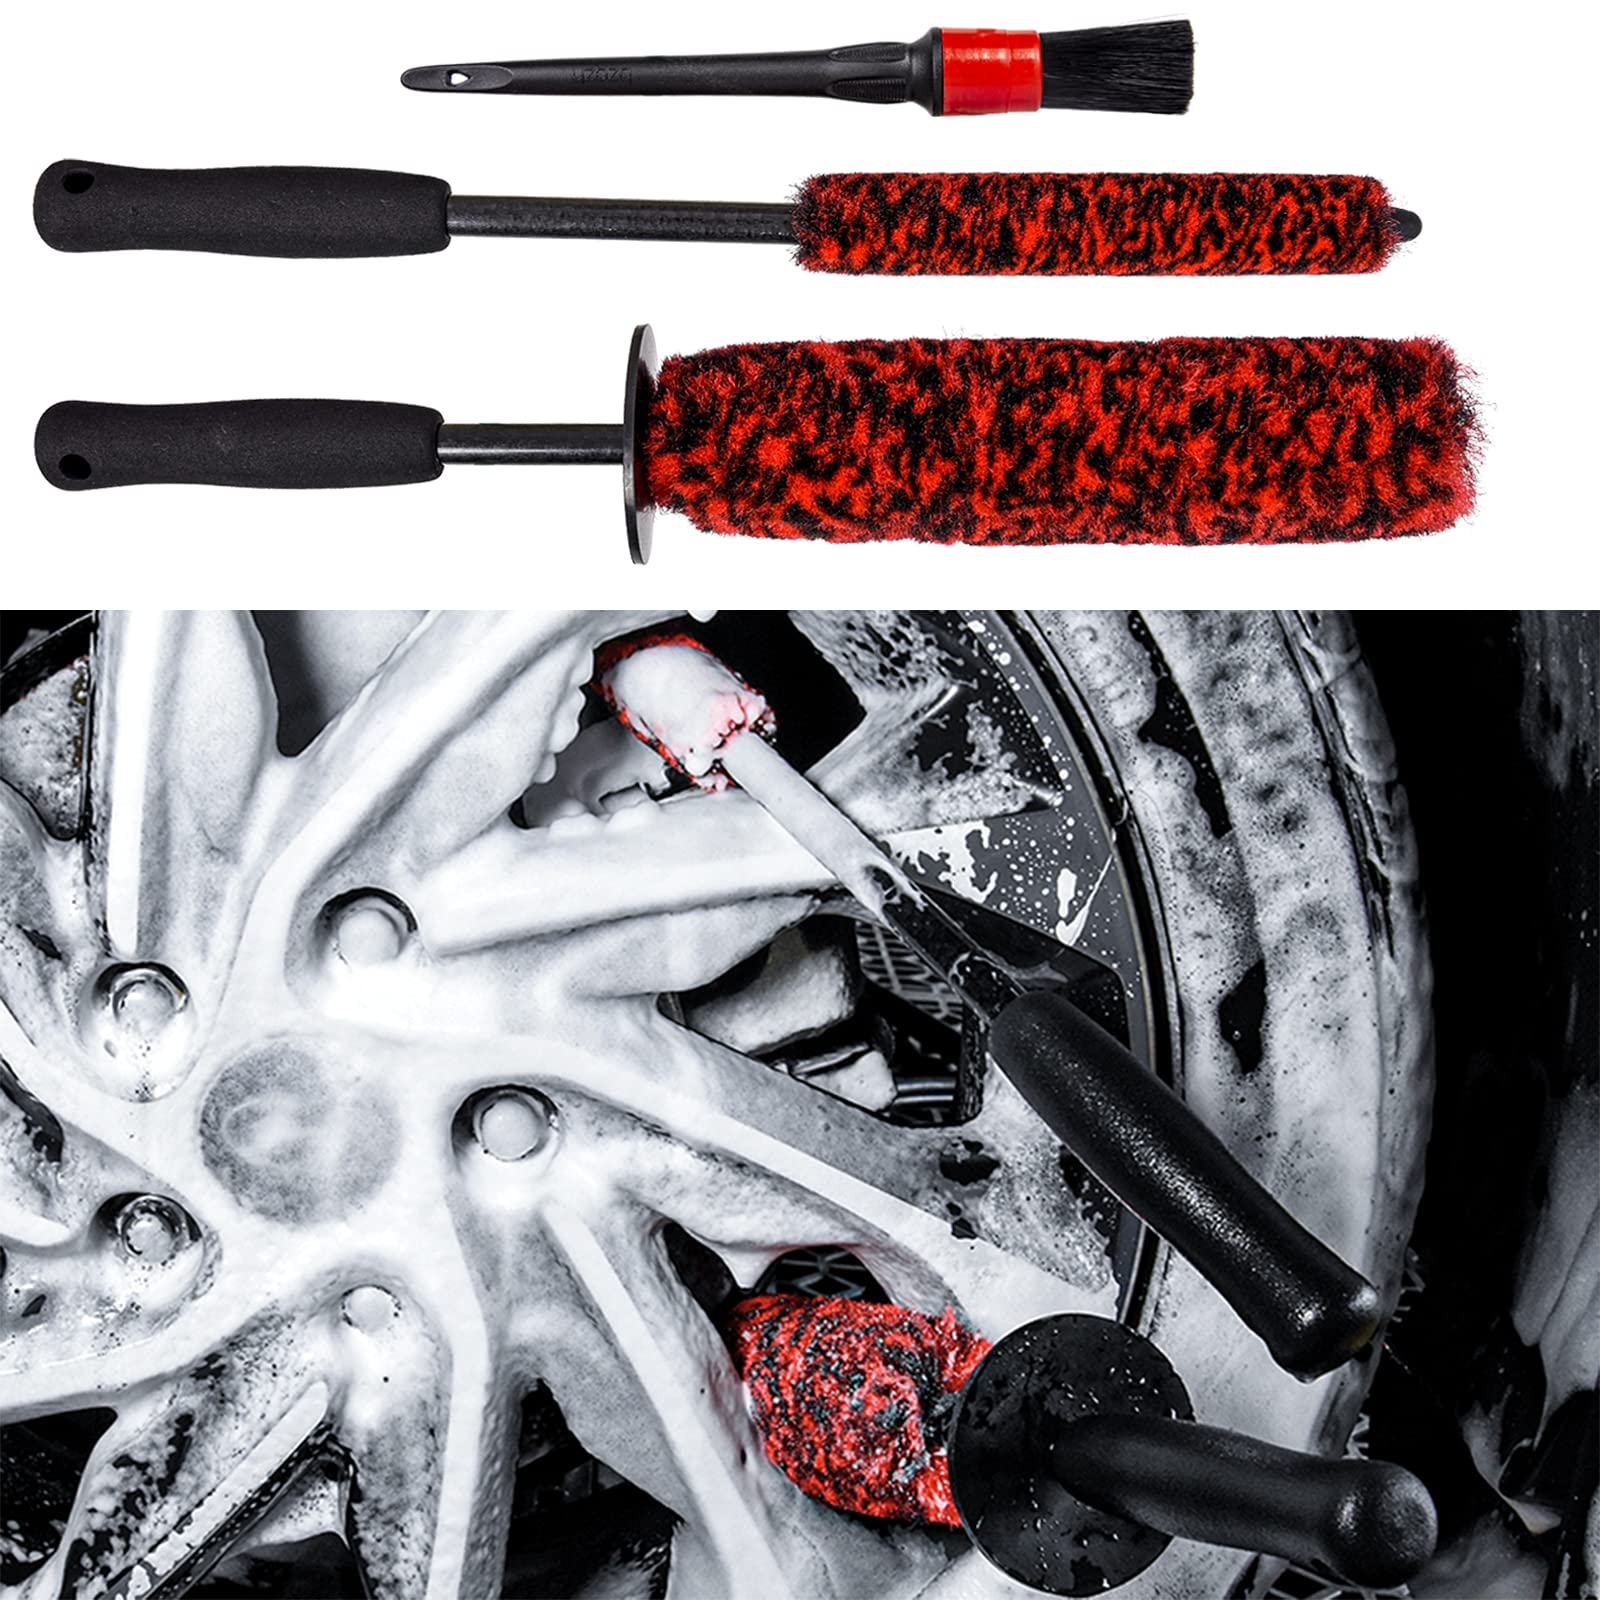 Bzczh 3 Pcs Soft Wheel Brushes For Cleaning Wheels Kit - 1X Synthetic Soft Car Wheel Rim Brush,1X Long Handle Cleaning Brush And